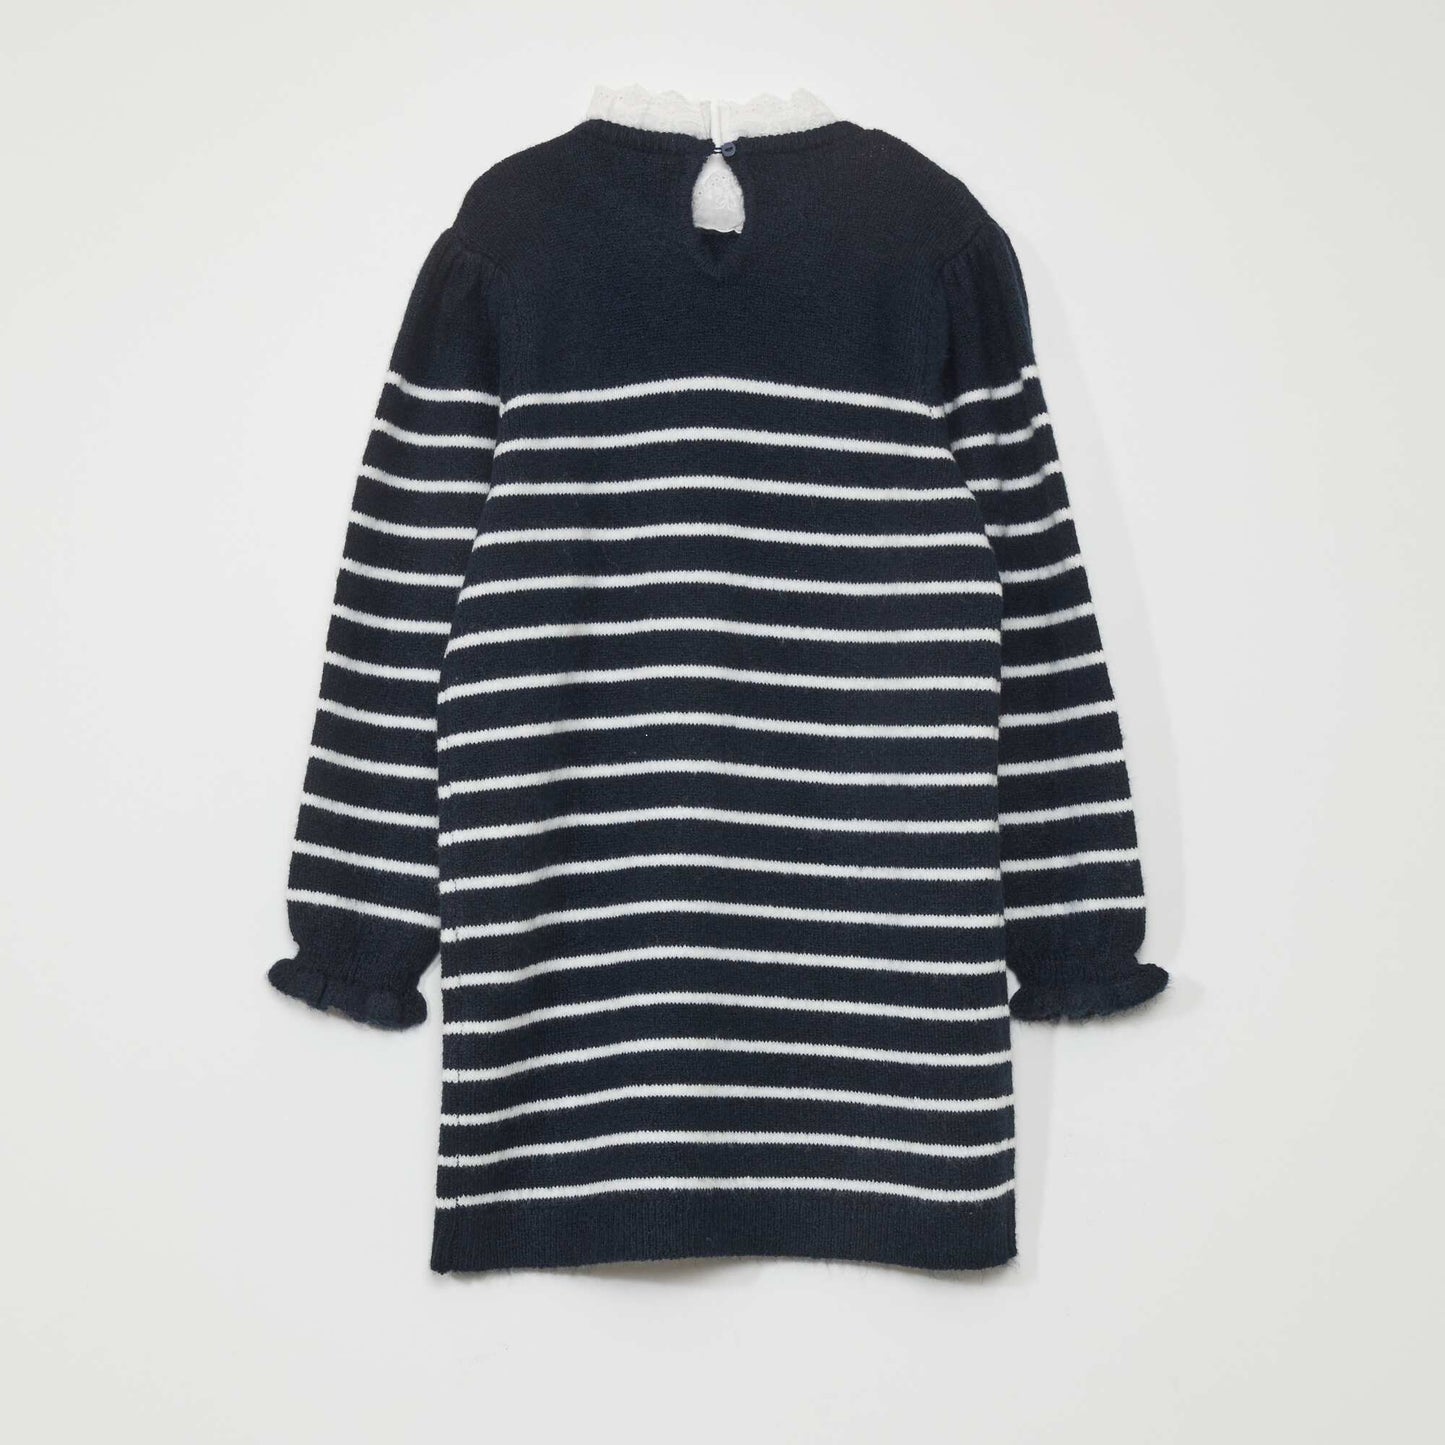 Striped knitted sweater dress BLUE